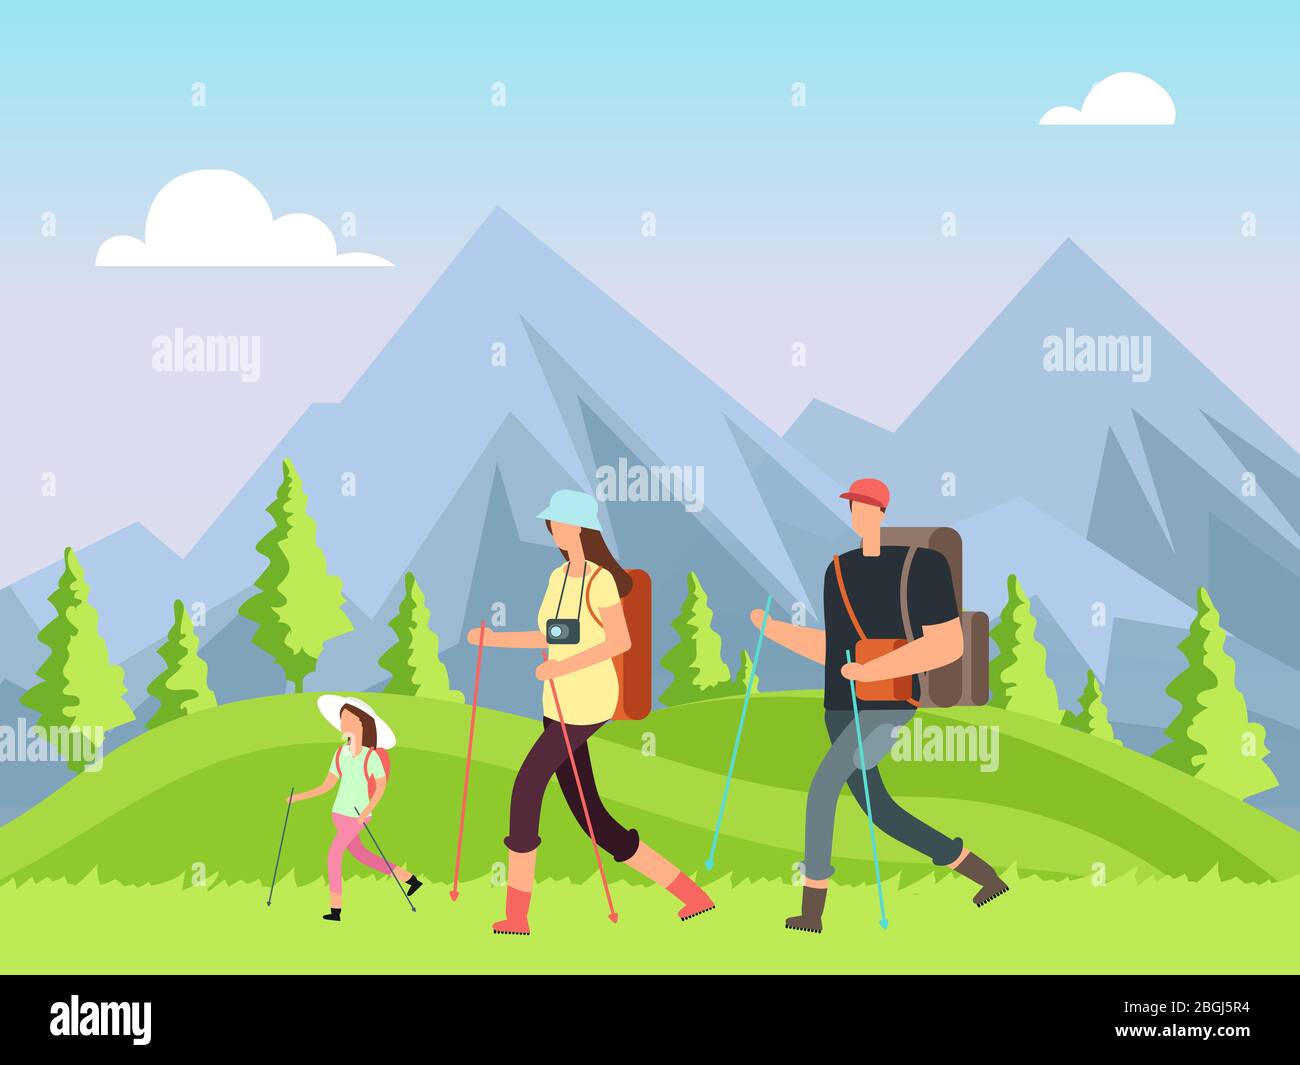 Hiking family in nature. Trekking man, woman and children with outdoor mountain landscape. Summer adventure vector background. Family walk, backpacking summertime scenic illustration Stock Vector